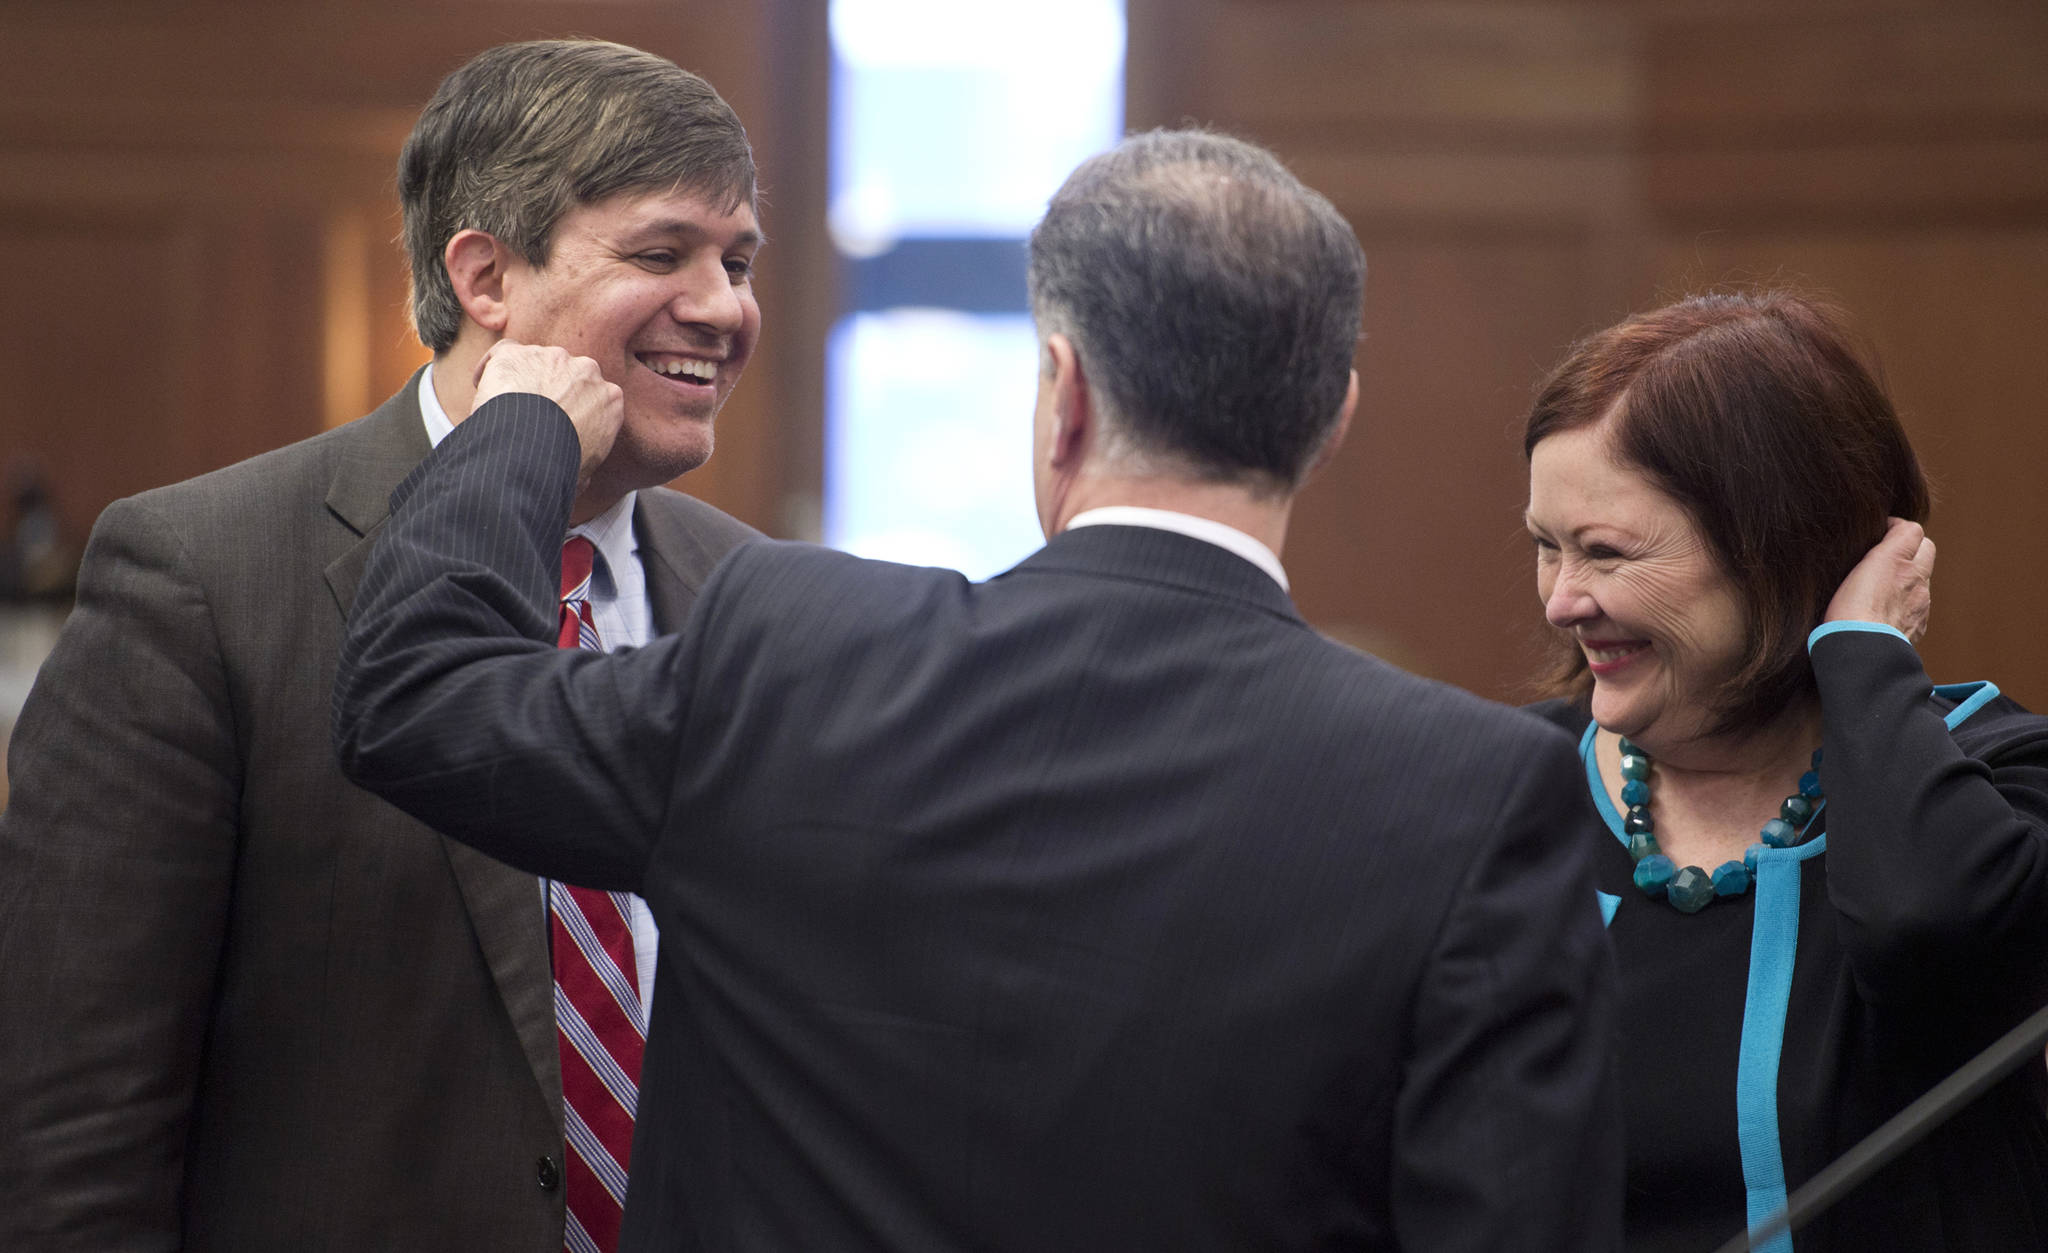 Sen. Bill Wielechowski, D-Anchorage, left, receives a lighthearted punch by Senate Majority Leader Pete Micciche, R-Soldotna, as Senate Minority Leader Berta Gardner, D-Anchorage, watches after Wielechowski’s three amendments to SB 26 were voted down in the Senate chambers on Wednesday. The Senate voted to use a portion of earnings from the Alaska Permanent Fund to fund government and cap dividends at $1,000 per person. (Michael Penn | Juneau Empire)